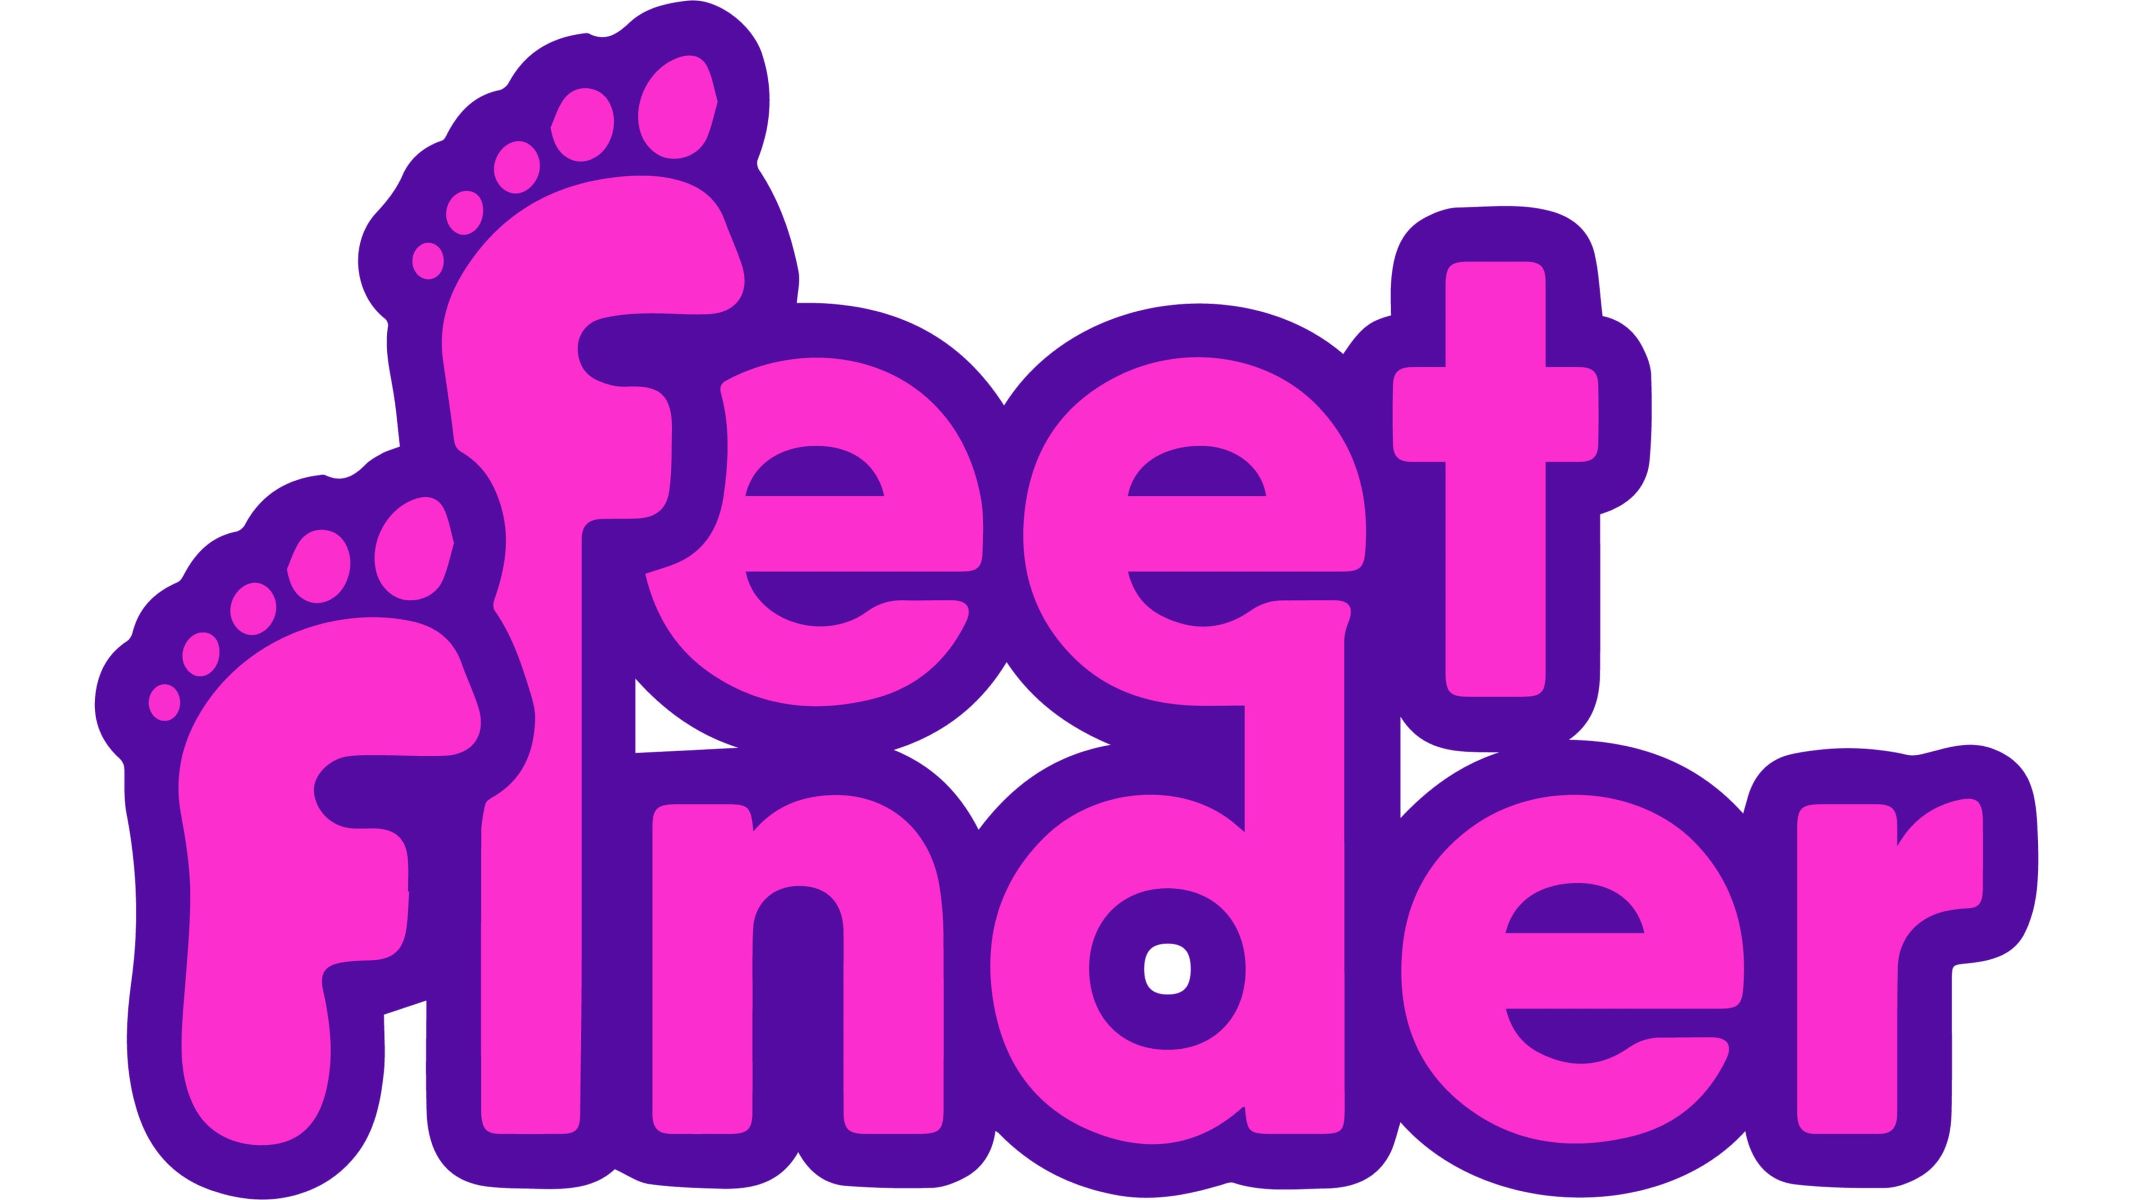 FeetFinder Review: Legit Or Scam? Uncover The Money-Making Potential!